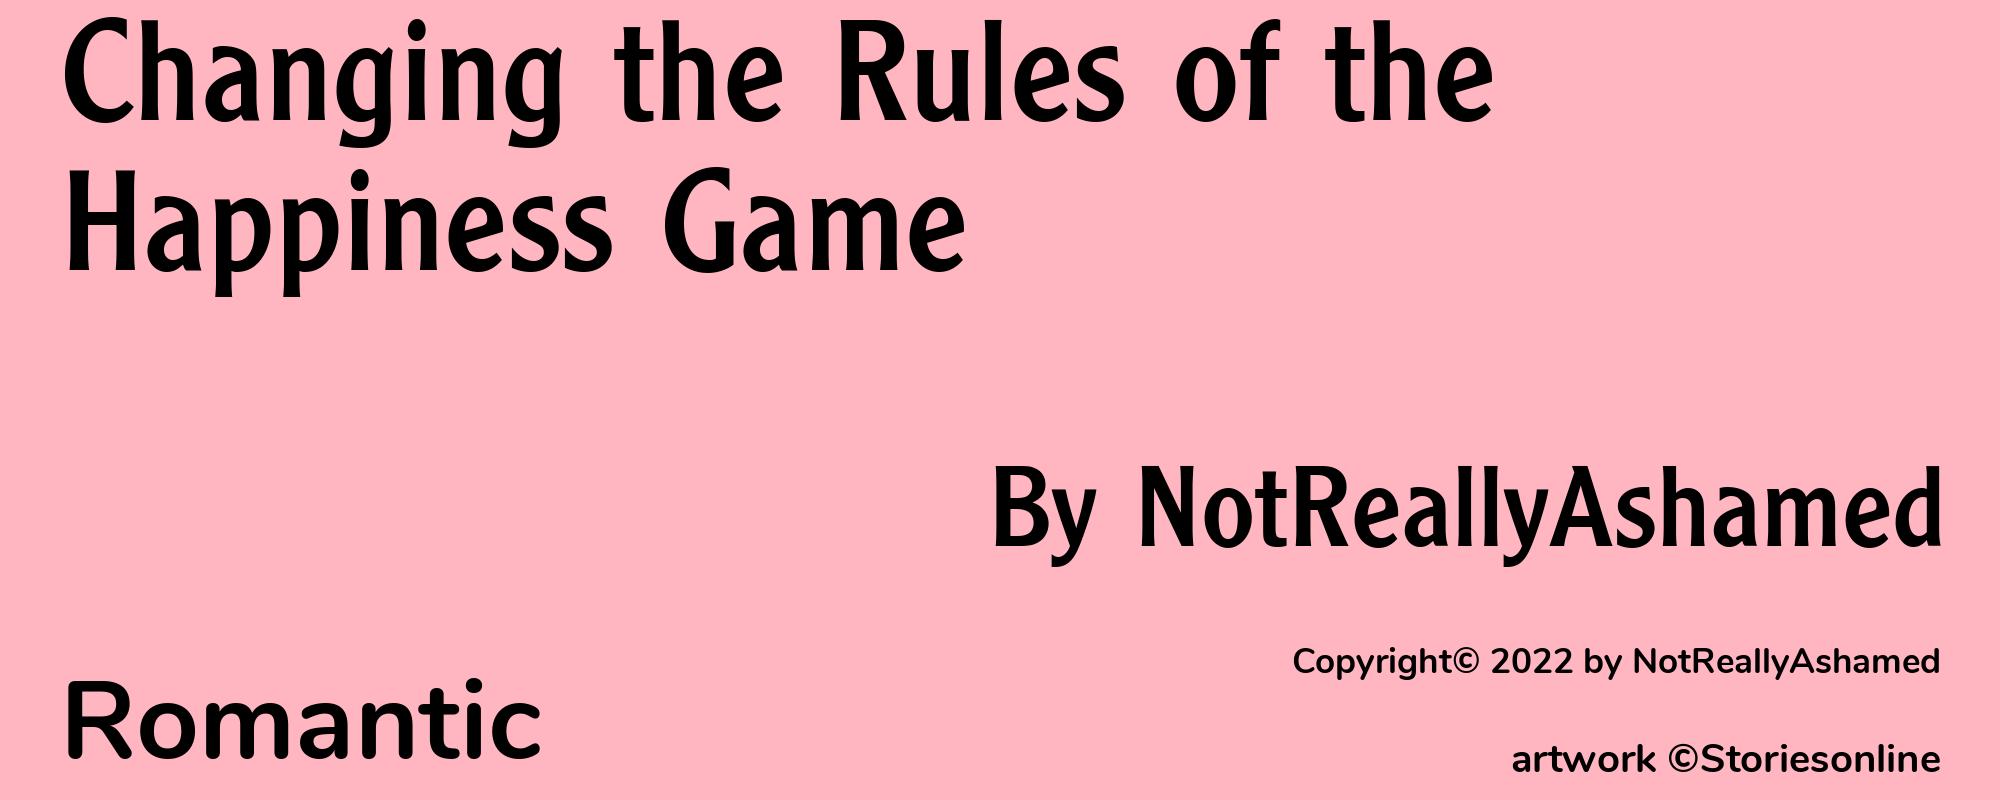 Changing the Rules of the Happiness Game - Cover